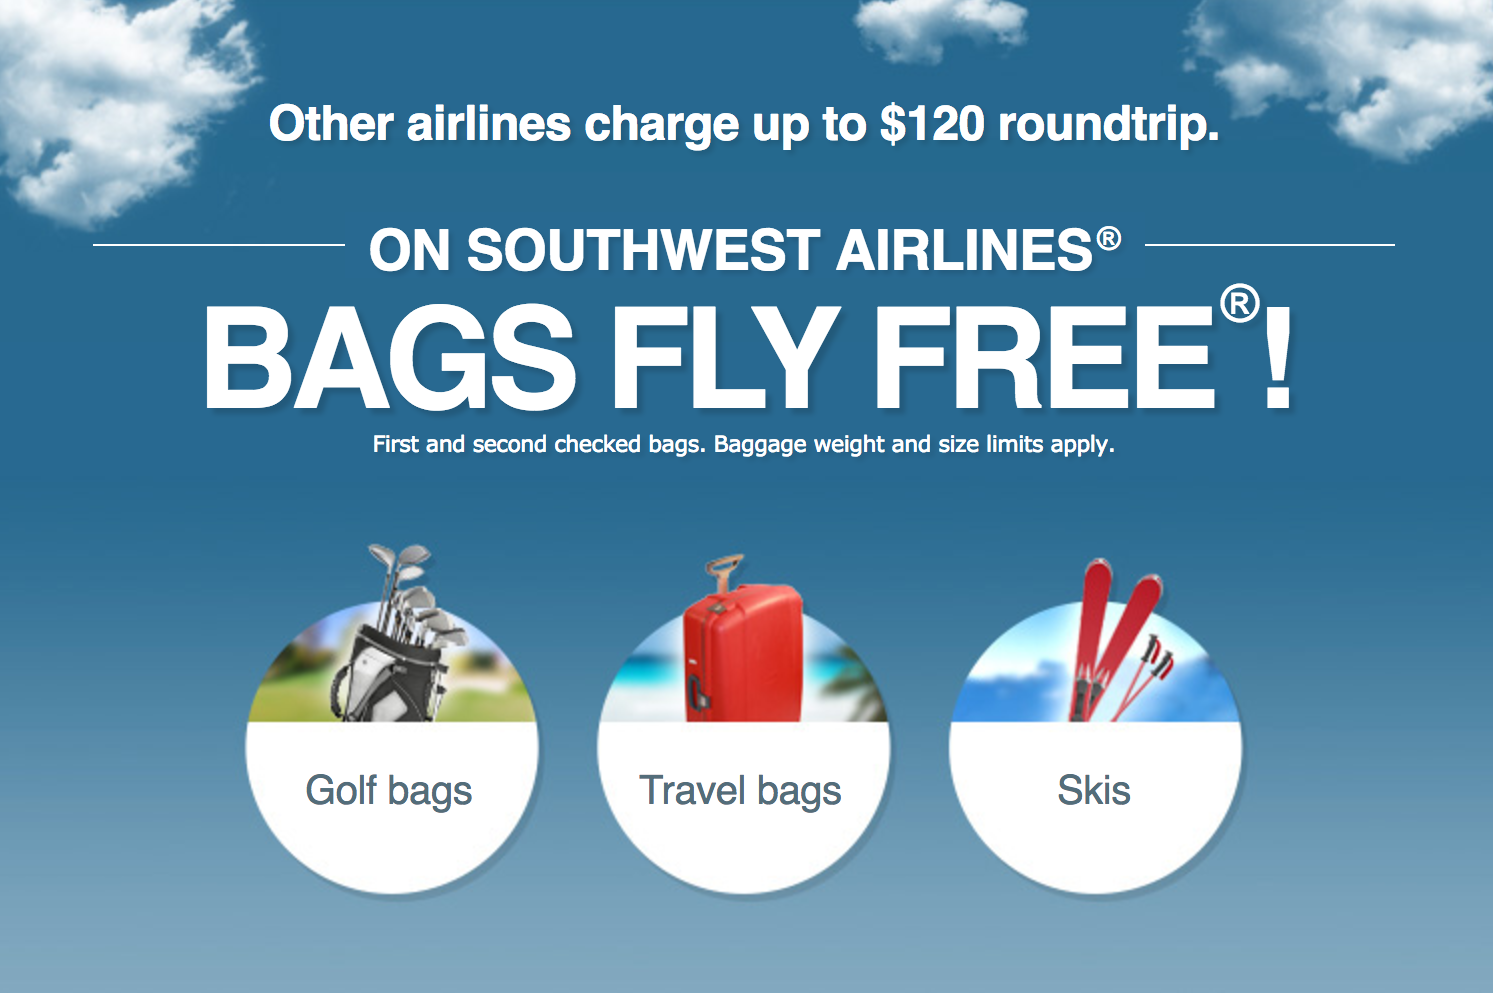 Southwest airlines baggage fees - rilovalues